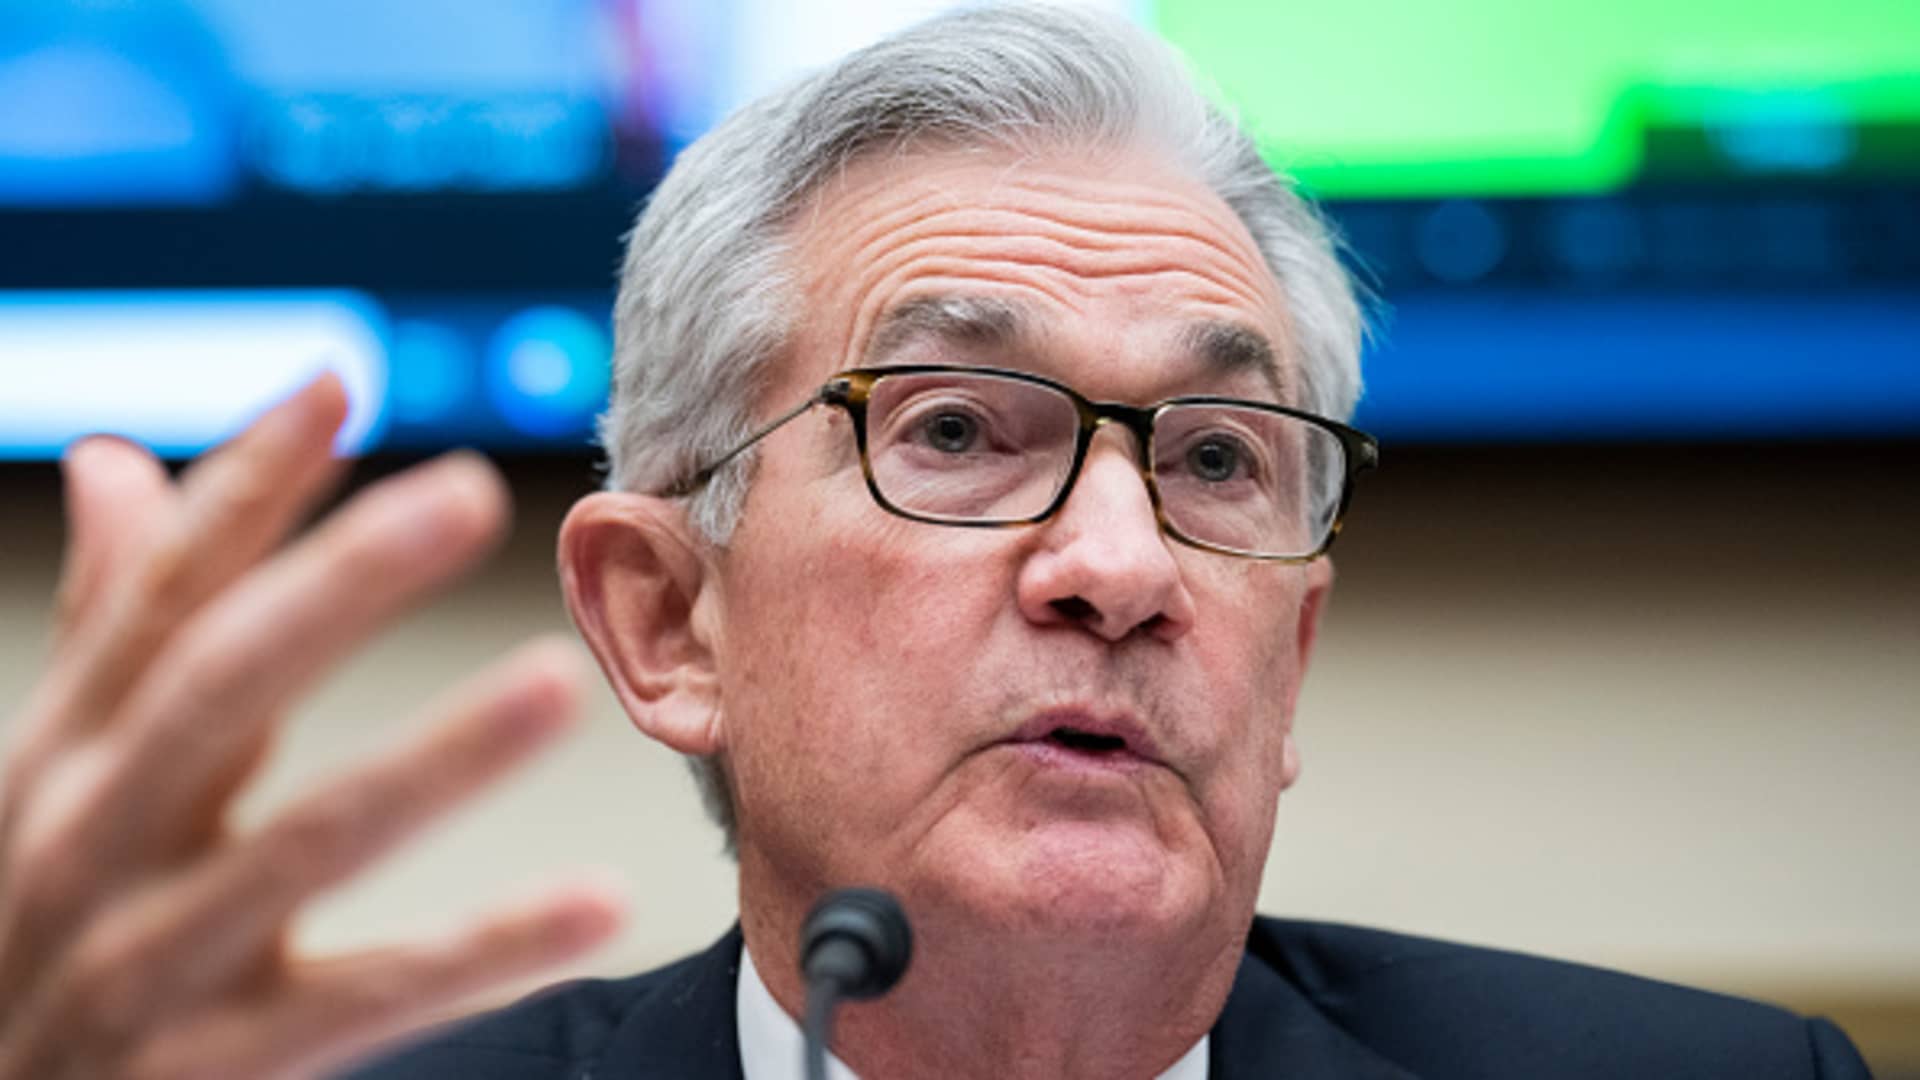 Federal Reserve Chairman Jerome Powell testifies during the House Financial Services Committee hearing titled Oversight of the Treasury Department's and Federal Reserve's Pandemic Response, in Rayburn Building on Wednesday, December 1, 2021.